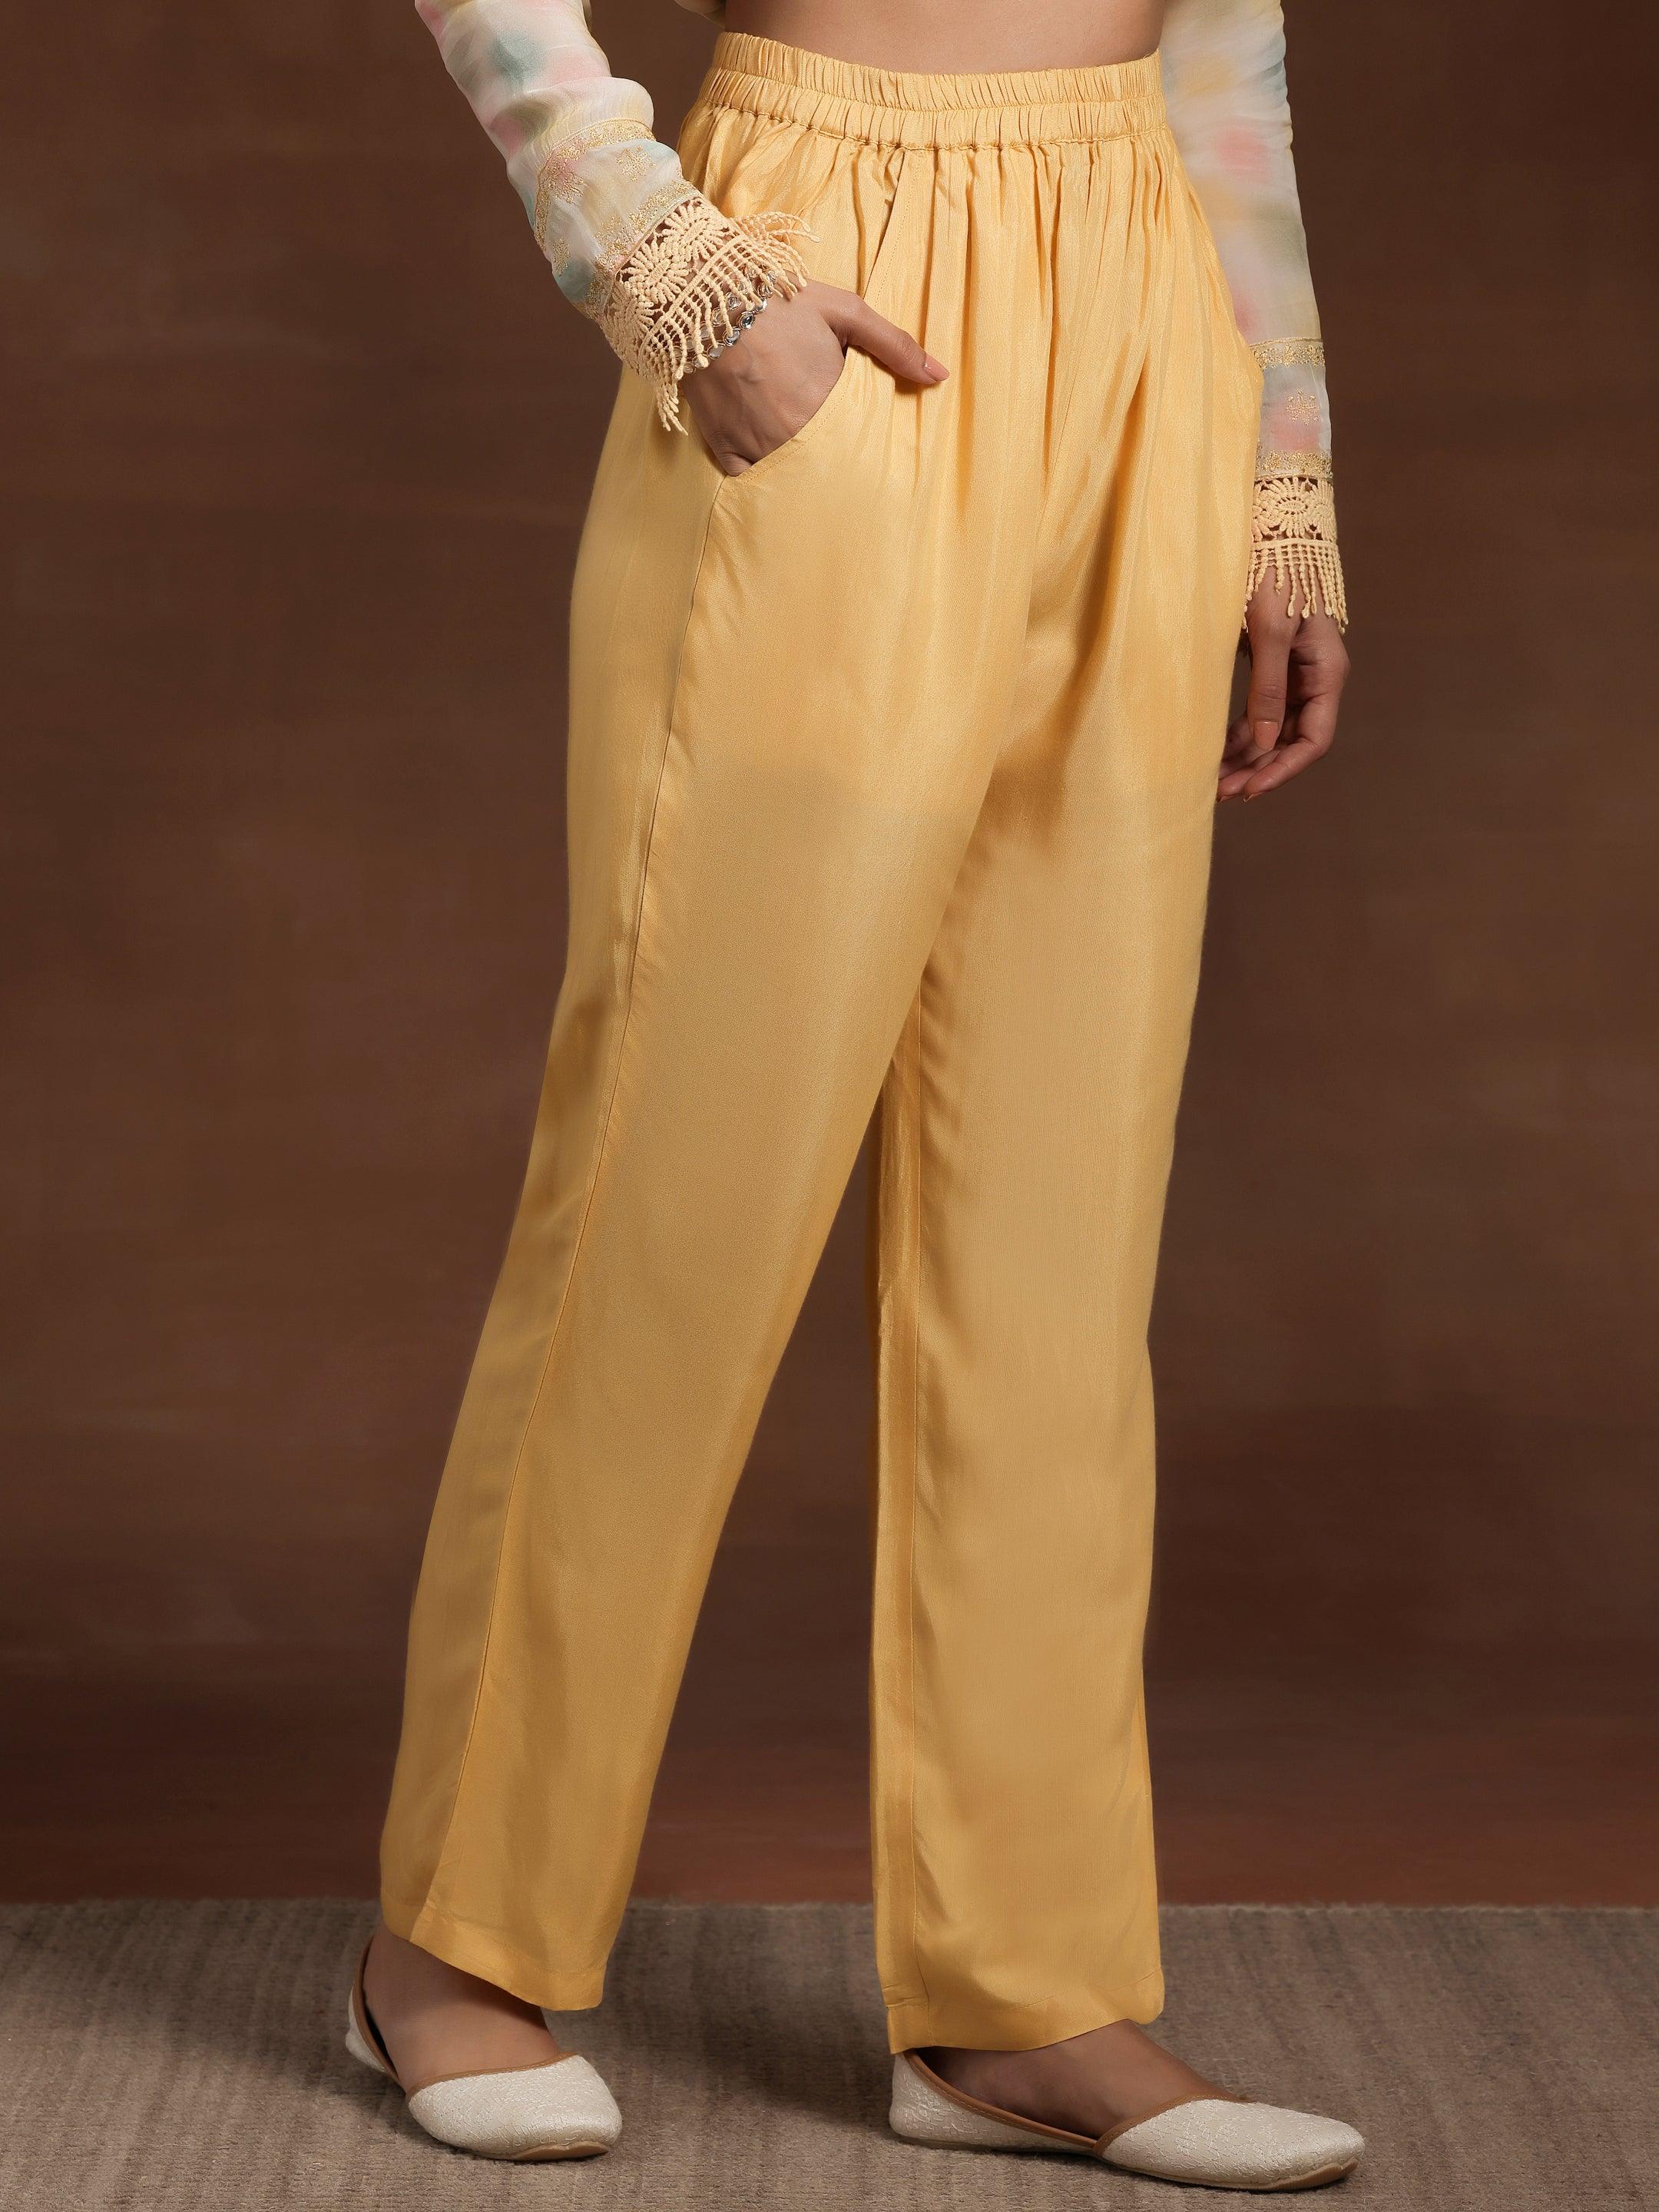 Yellow Embroidered Organza Straight Suit With Dupatta